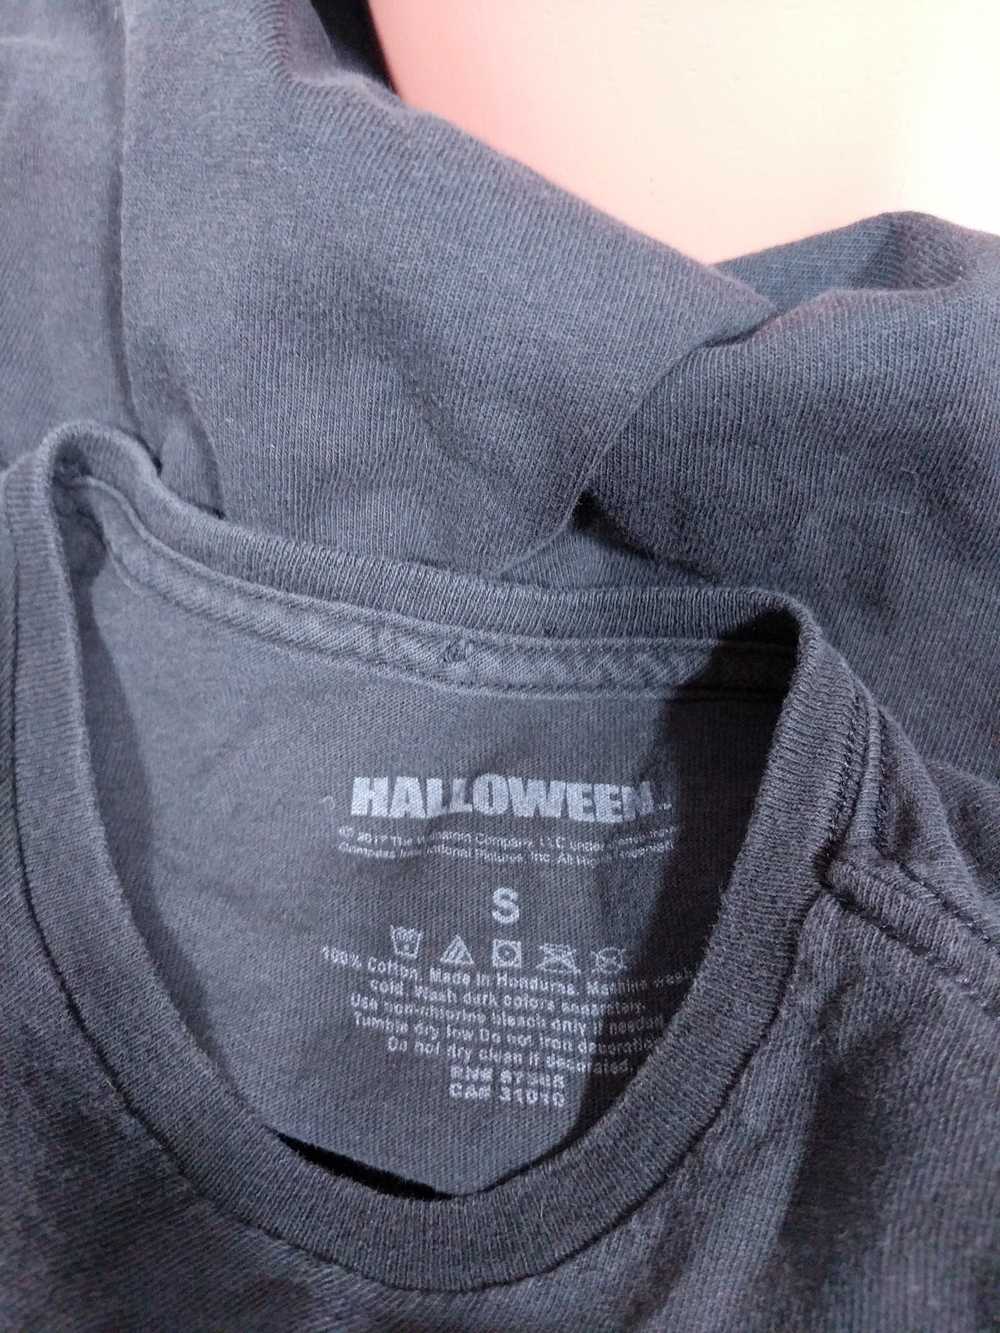 Movie Every Day Is Halloween T-Shirt Sz Small Bla… - image 7